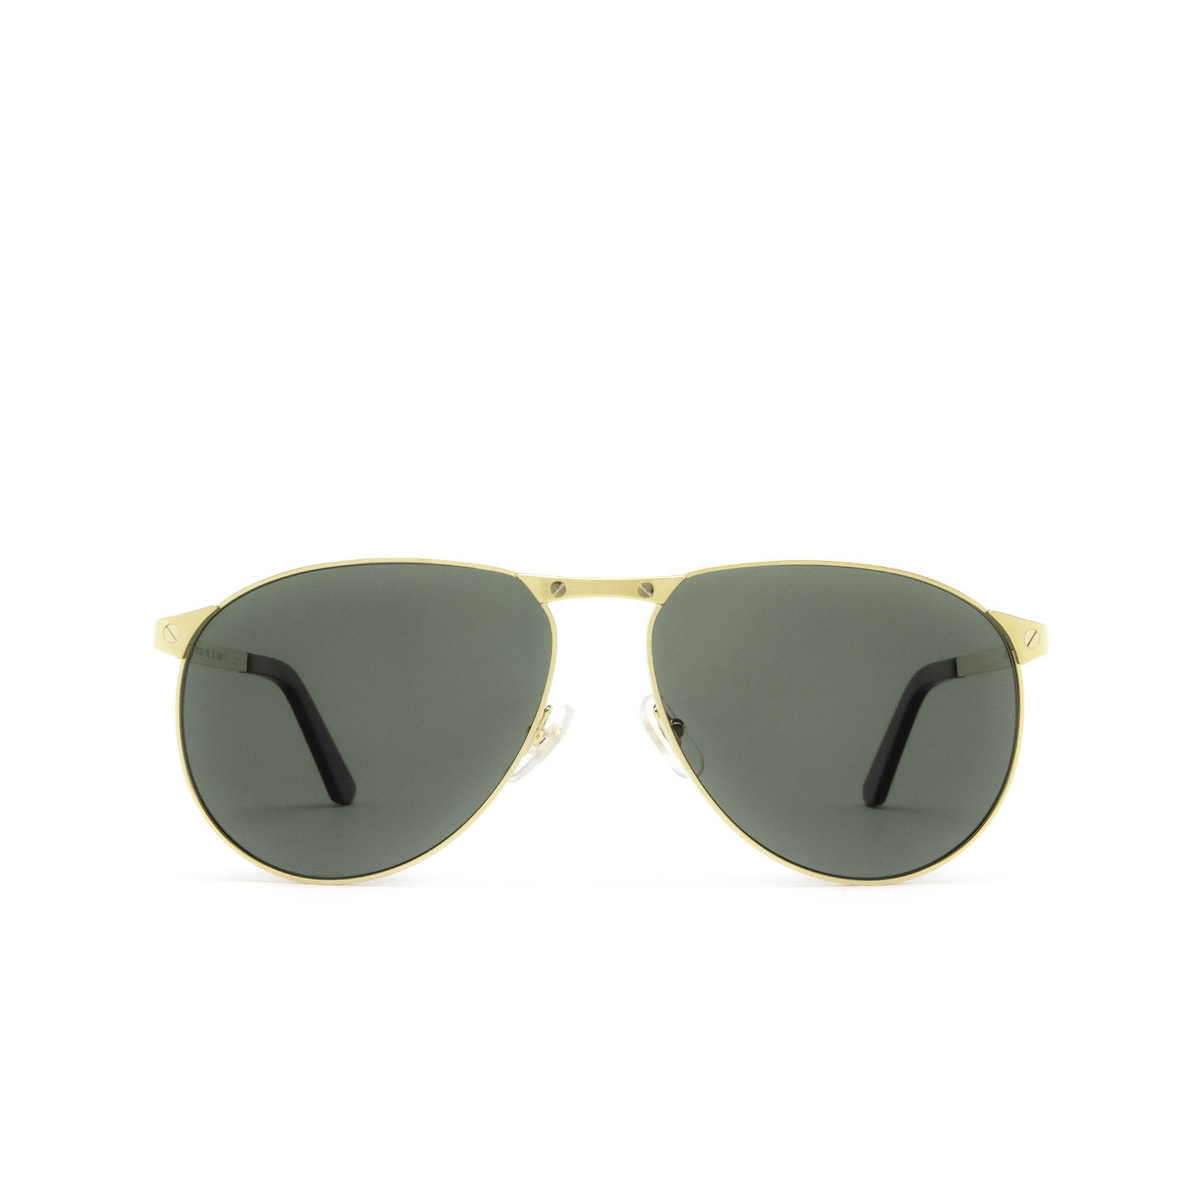 Cartier® Aviator Sunglasses: CT0323S color Gold 002 - front view.